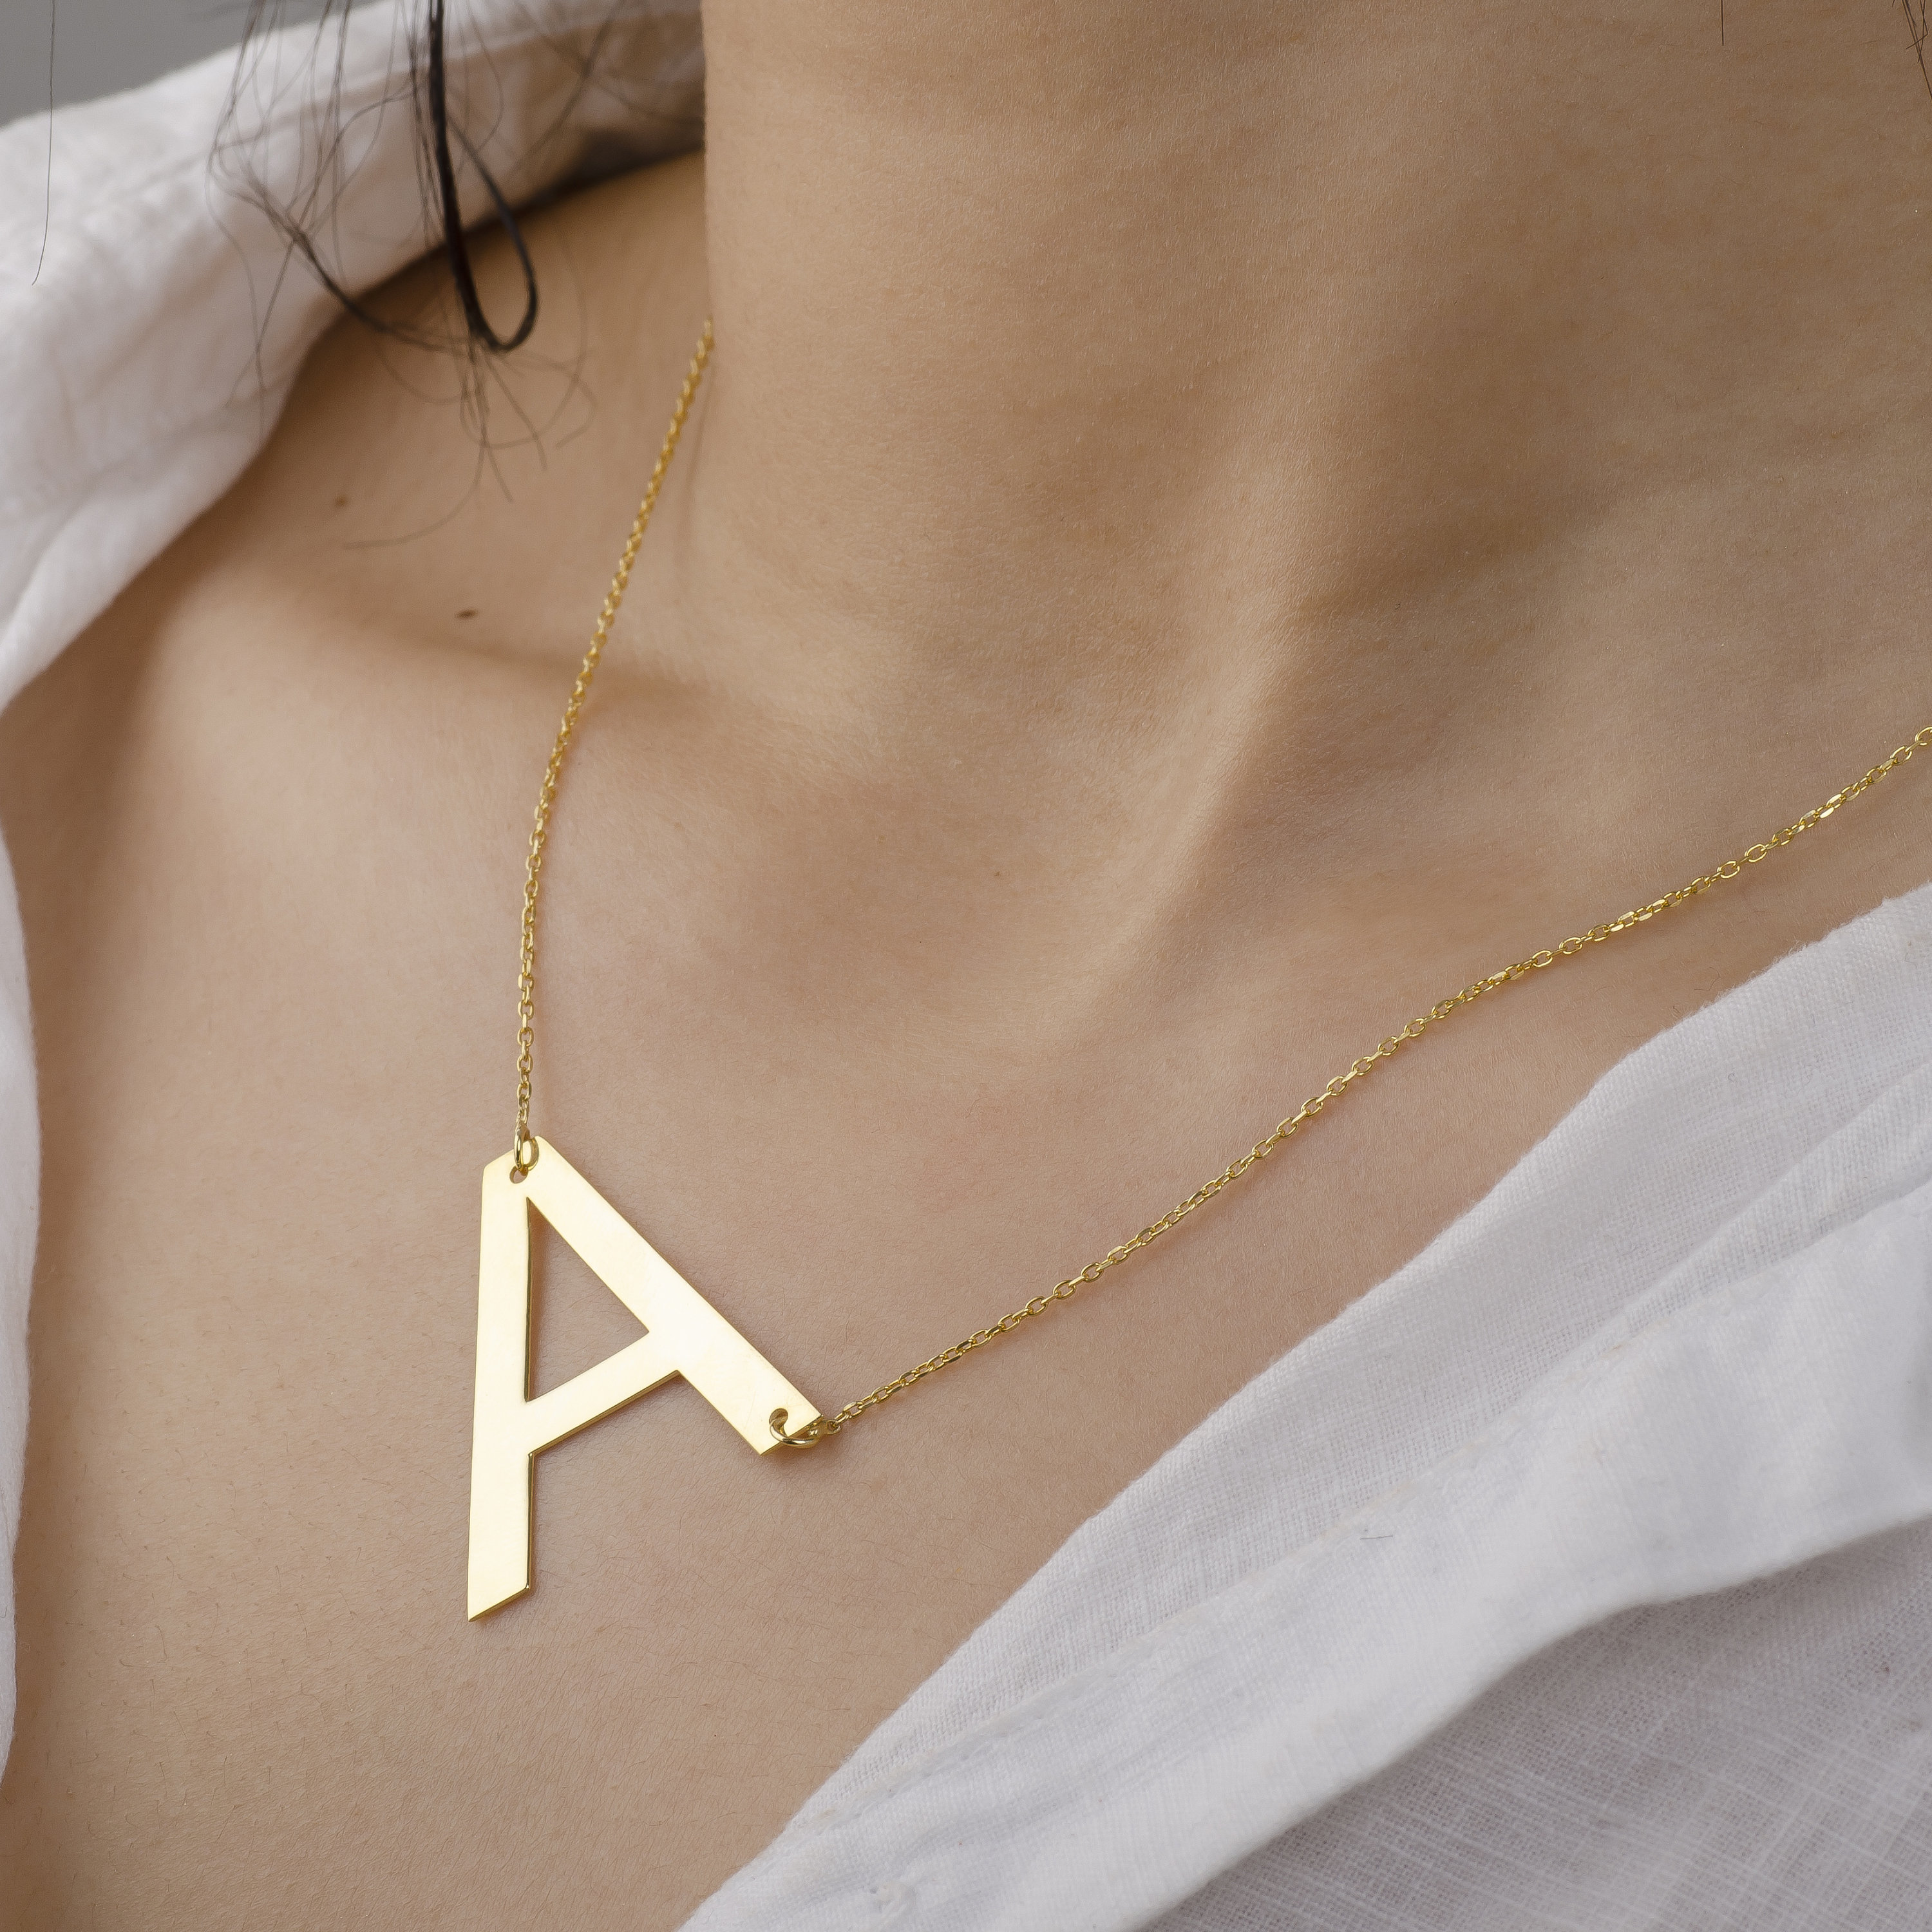 Custom Sideways Initial Necklace Large Letter Necklace Etsy